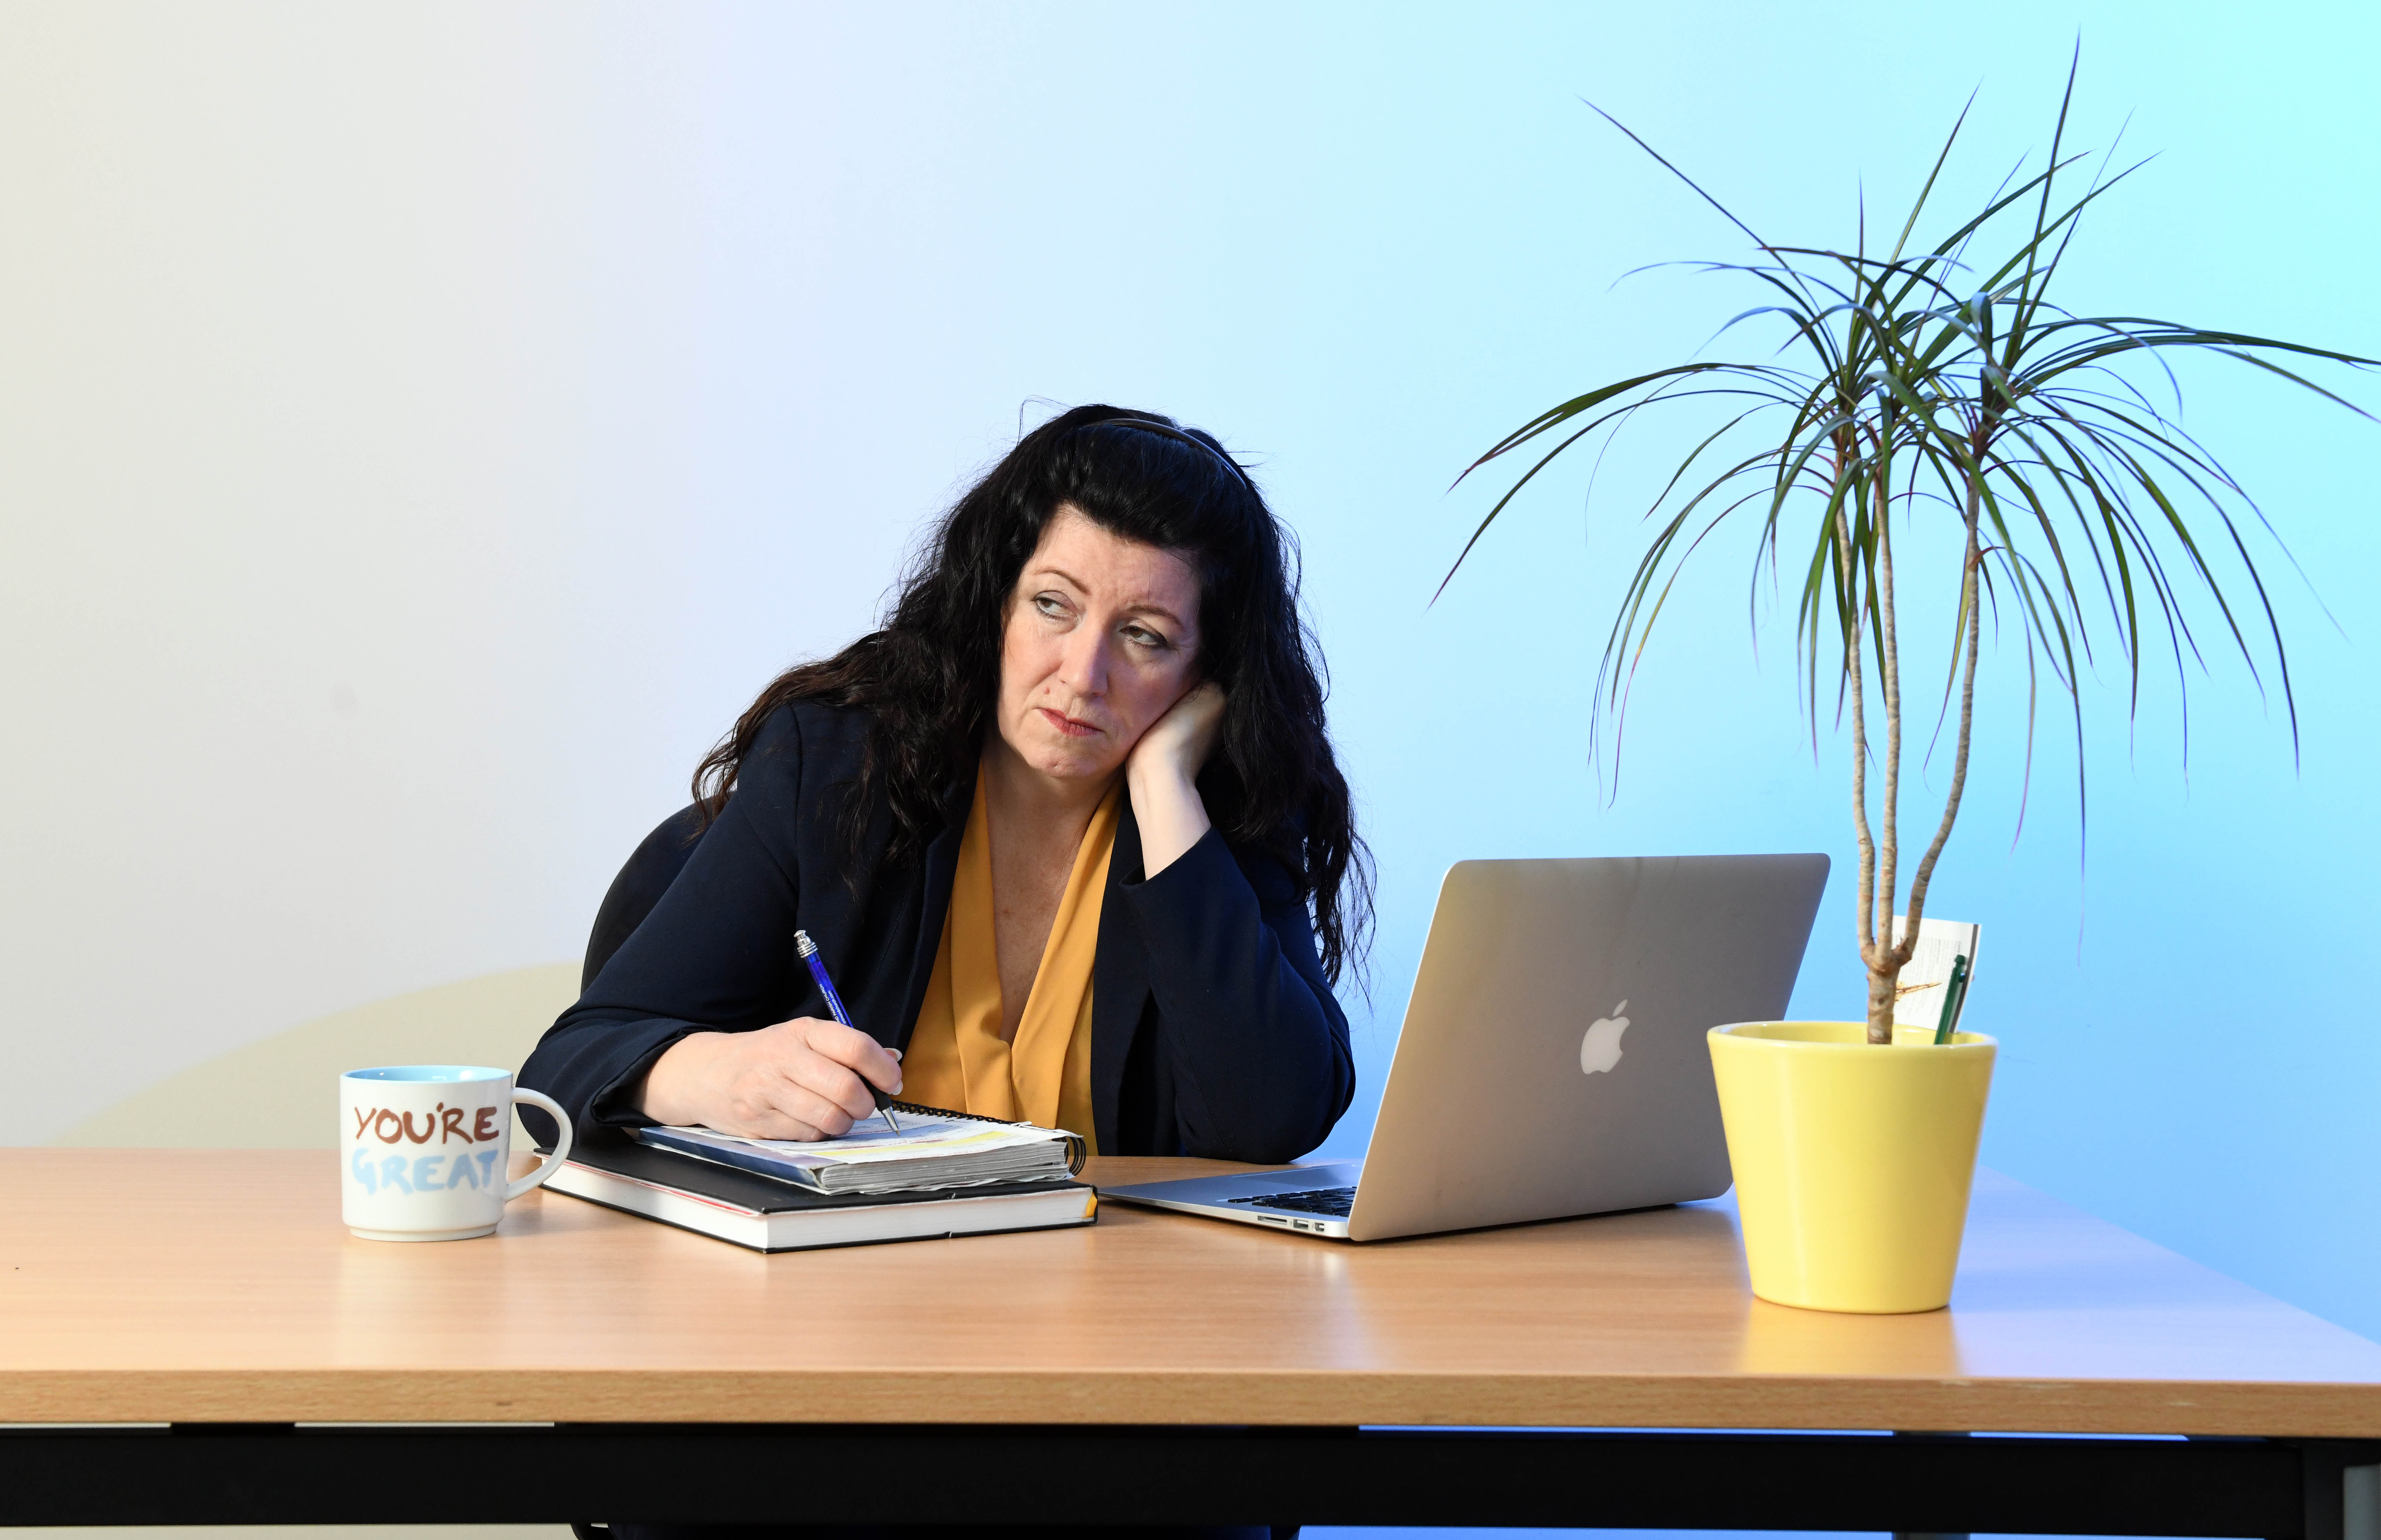 And finally... Scots feign illness and work from home to avoid poor office design